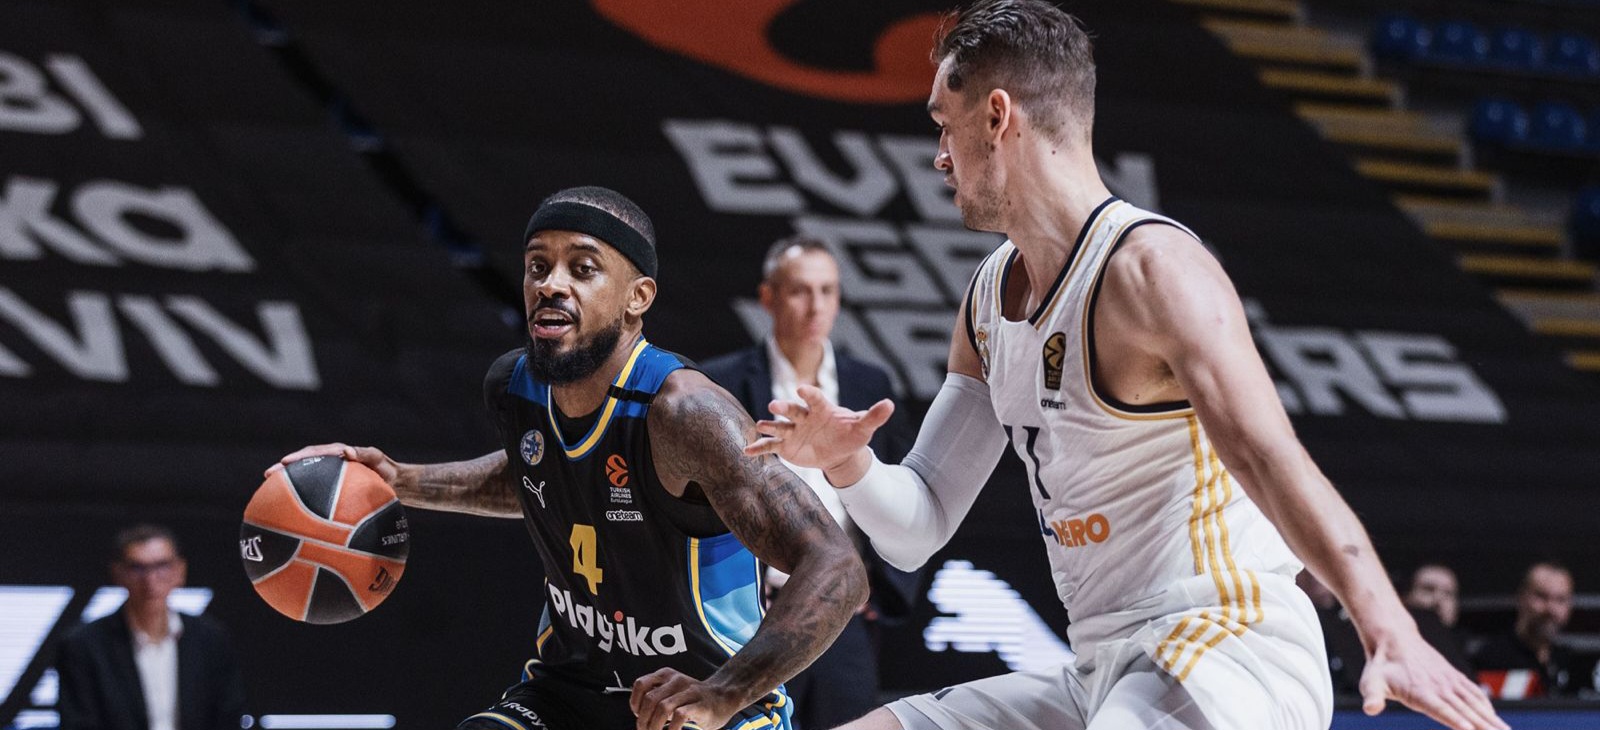 Taking nothing for granted: Maccabi Tel Aviv faces ALBA Berlin in a must-win game to stay over .500